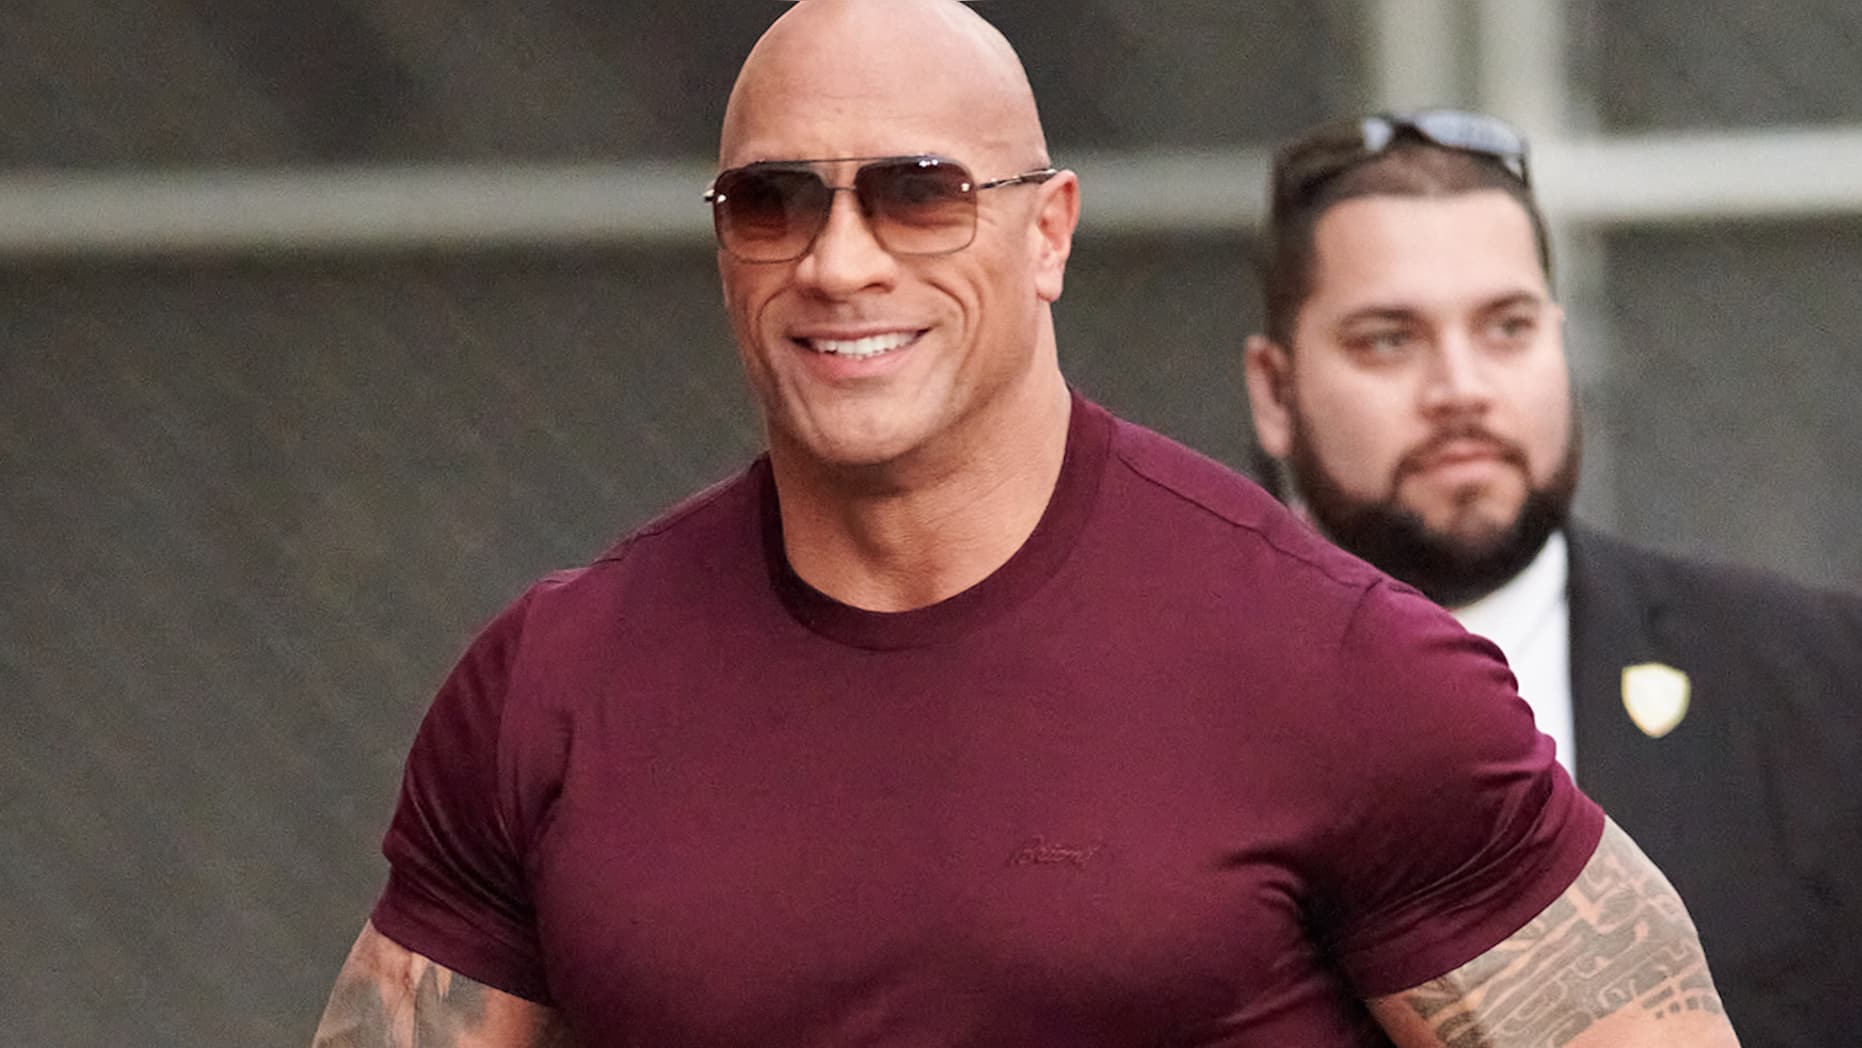 WWE’s “The Rock” To Run For President In 2024? American Downfall